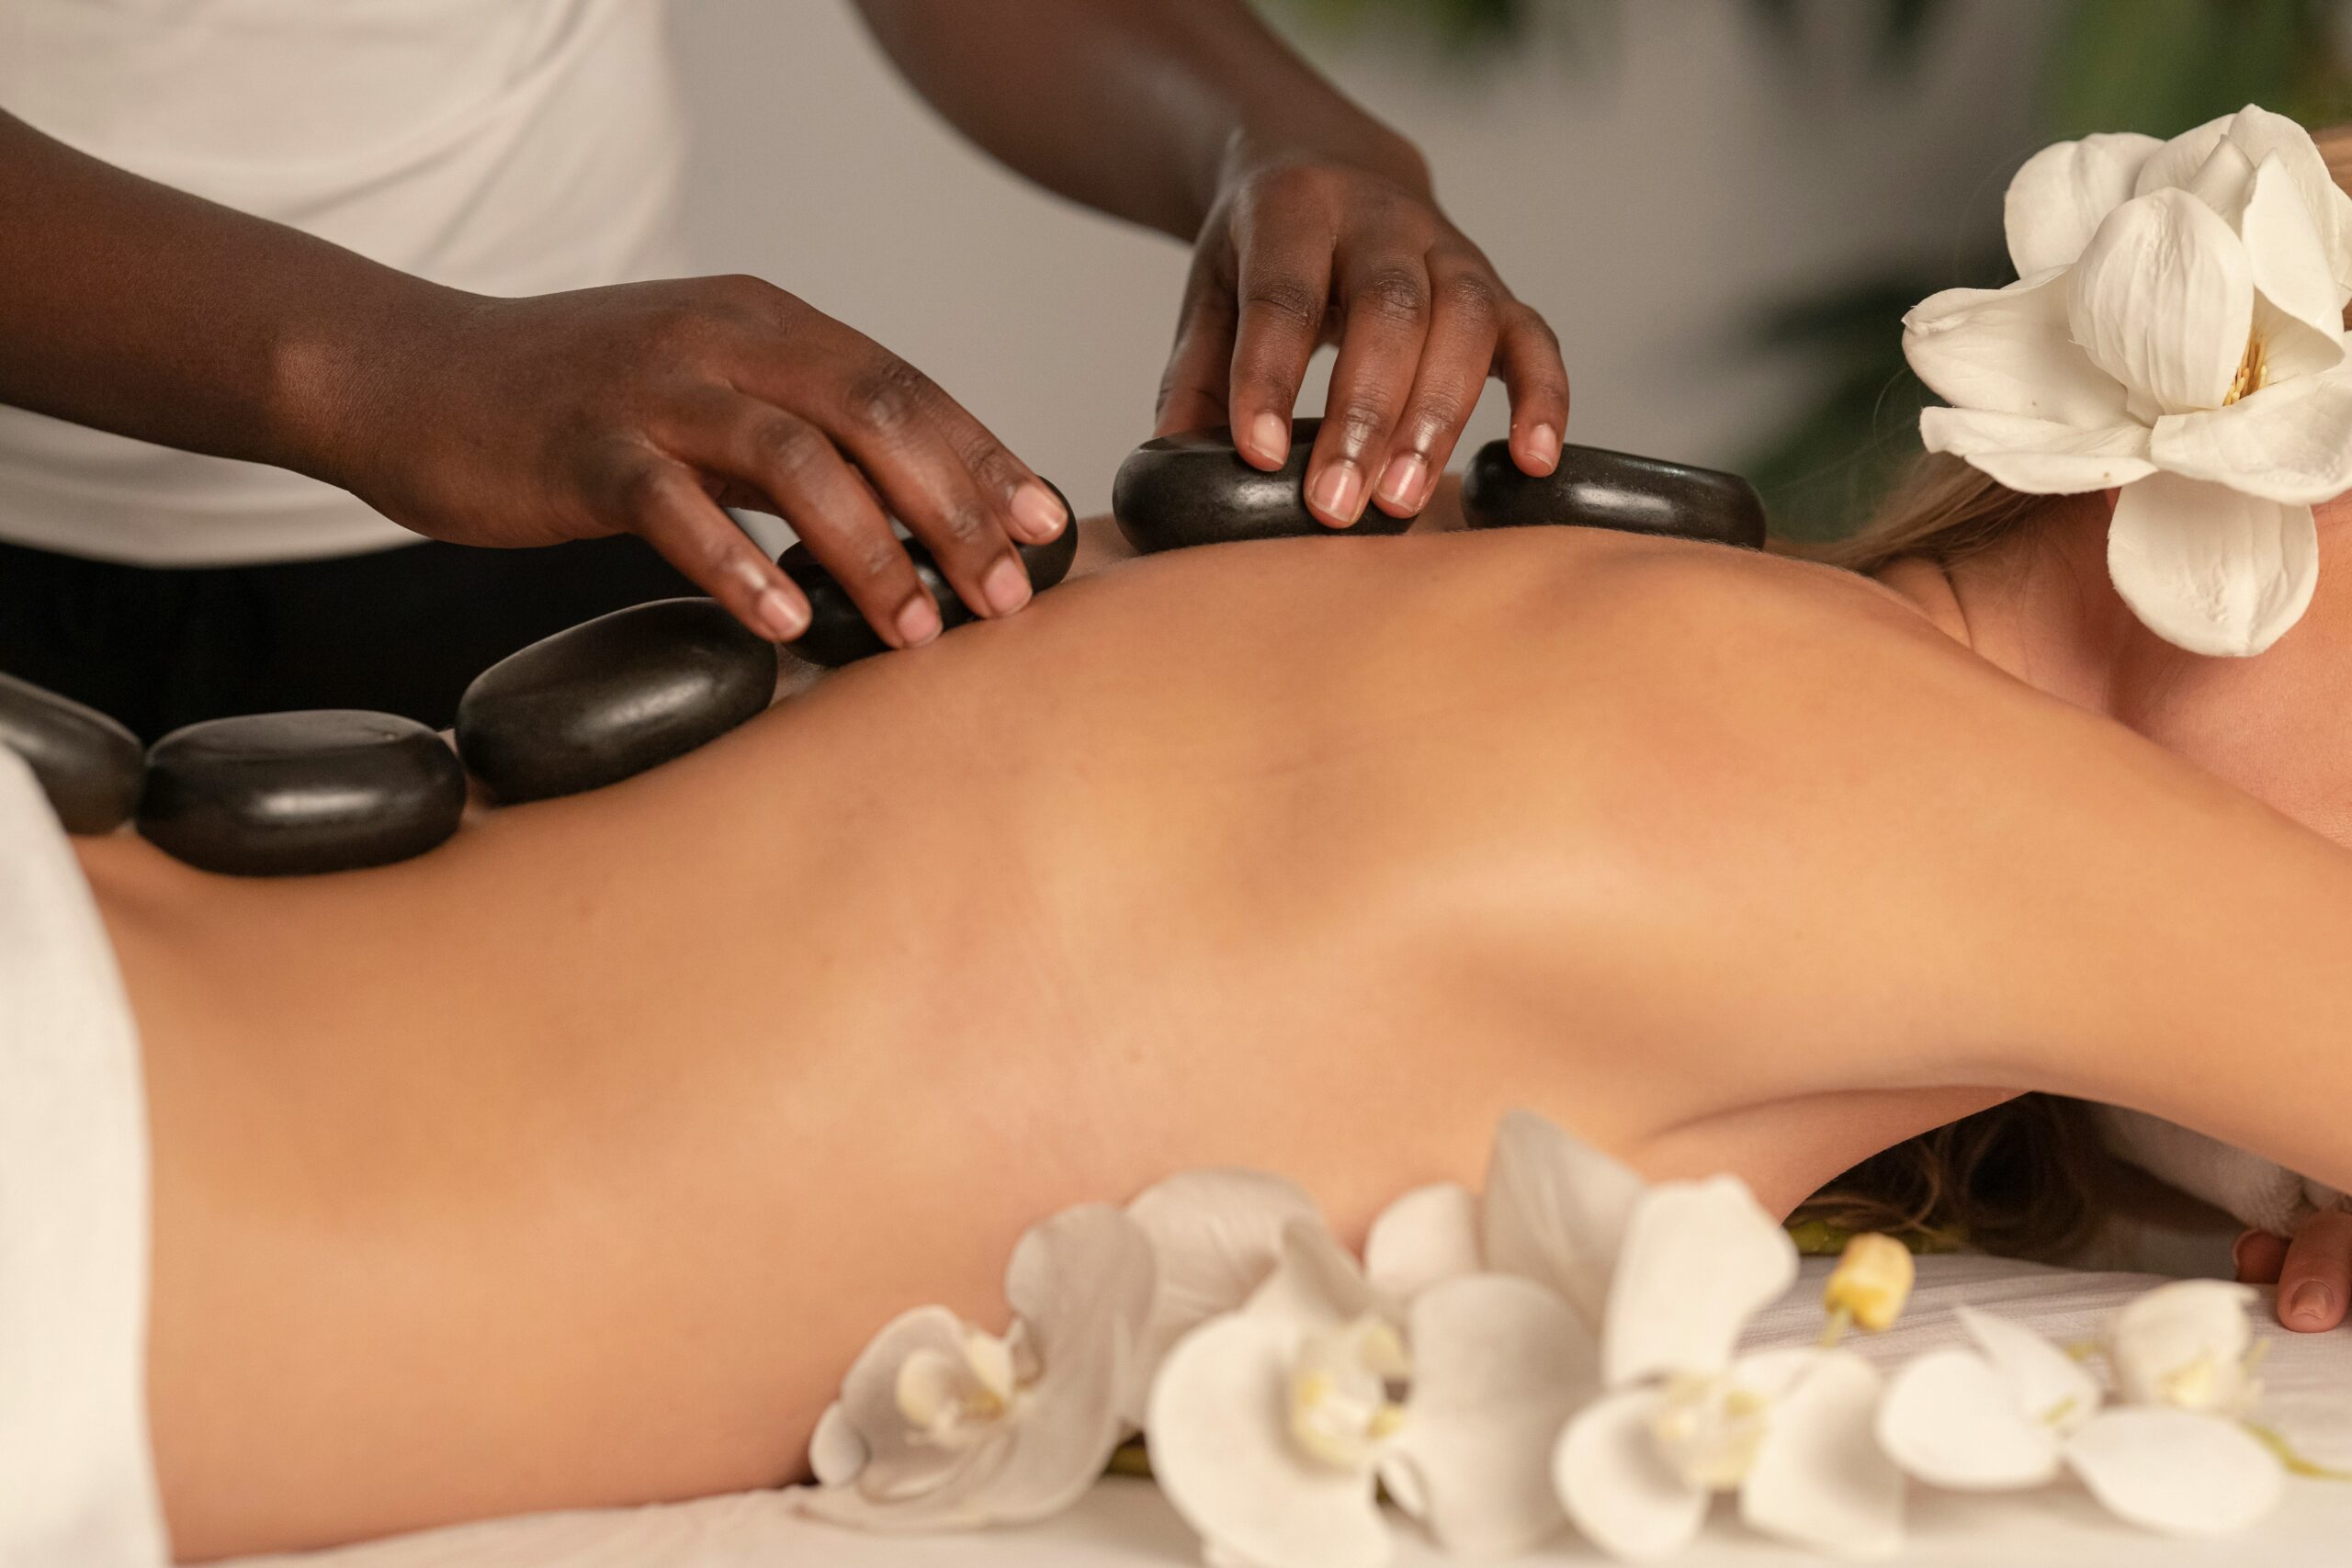 The Ultimate Guide to Finding the Best Massage Shop Recommendation Sites